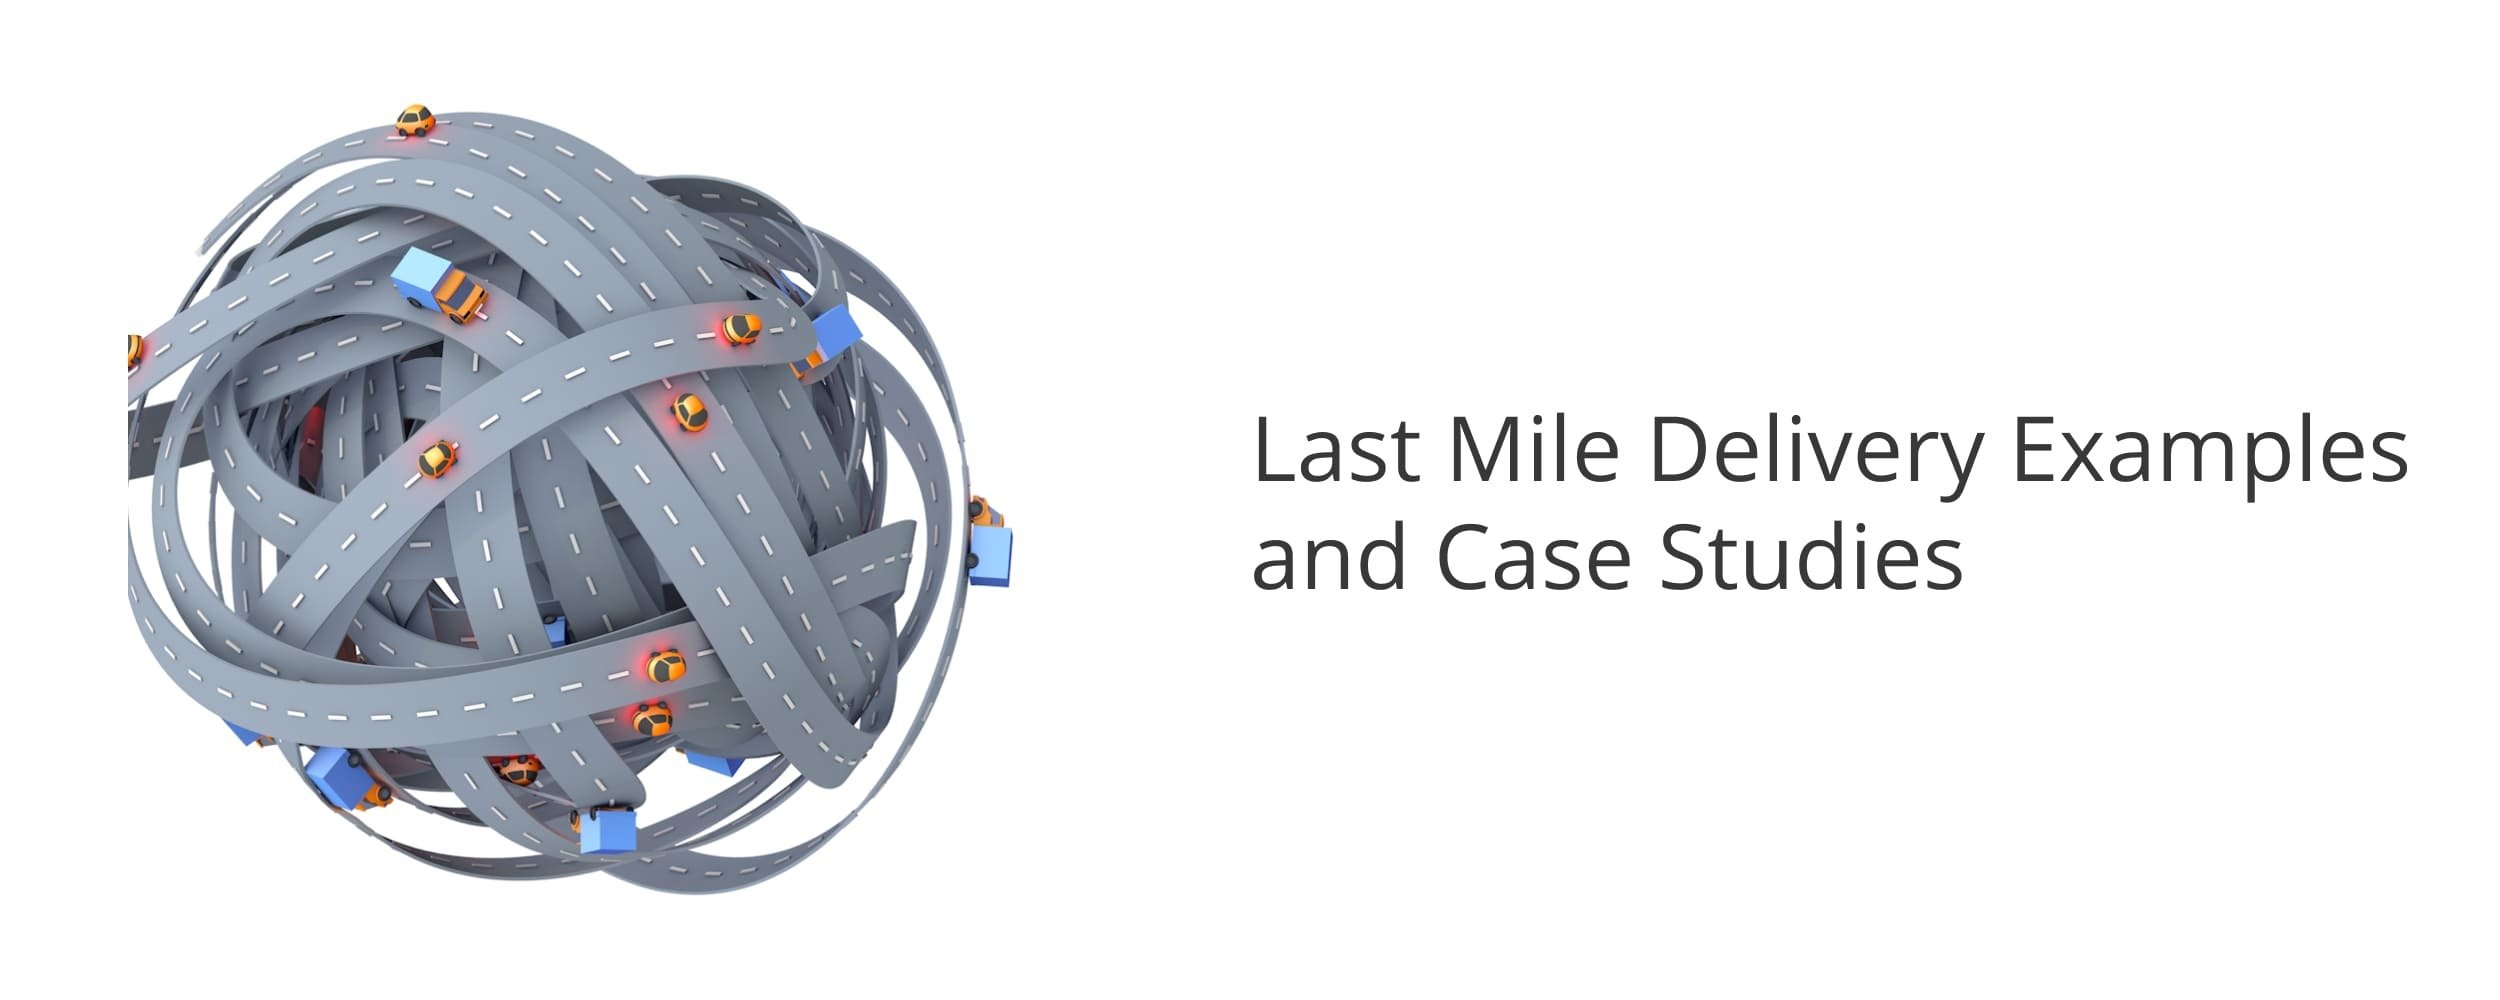 Last mile delivery examples with real-life case studies about delivery businesses.